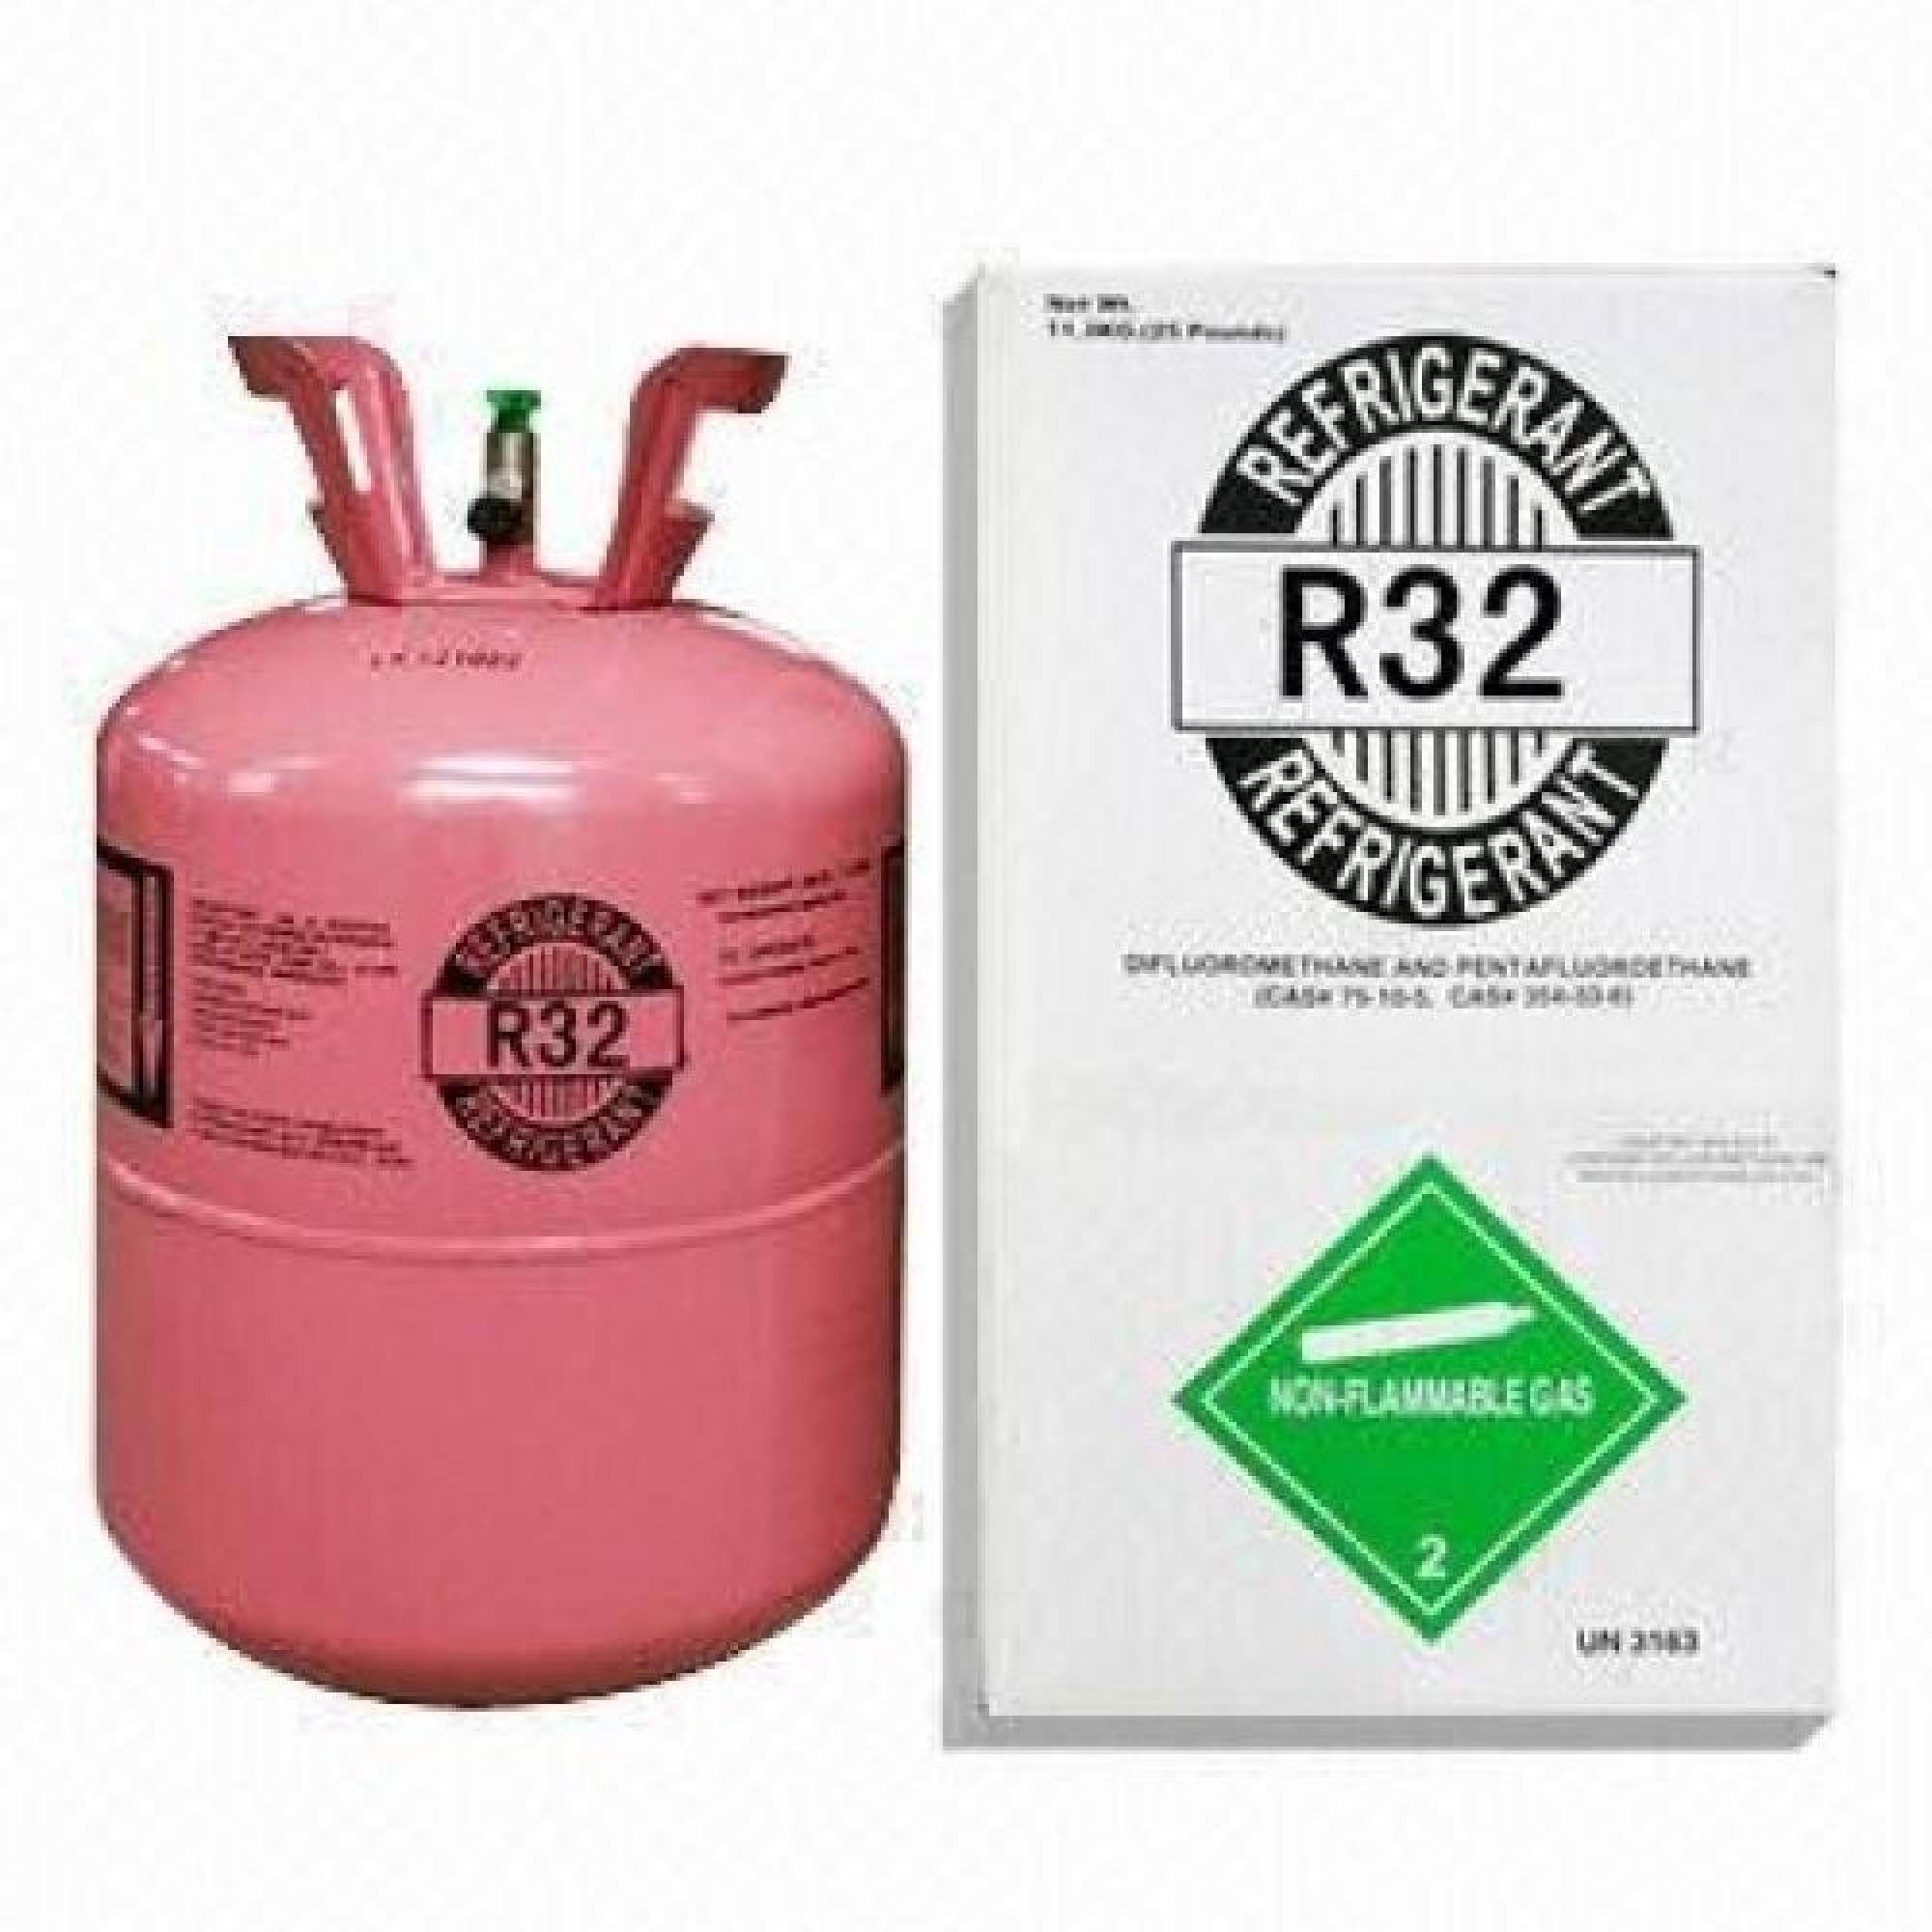 https://www.iclimatesolutions.co.uk/userfiles/images/listings/what-is-r32-refrigerant--20210629124142-thumb.jpg